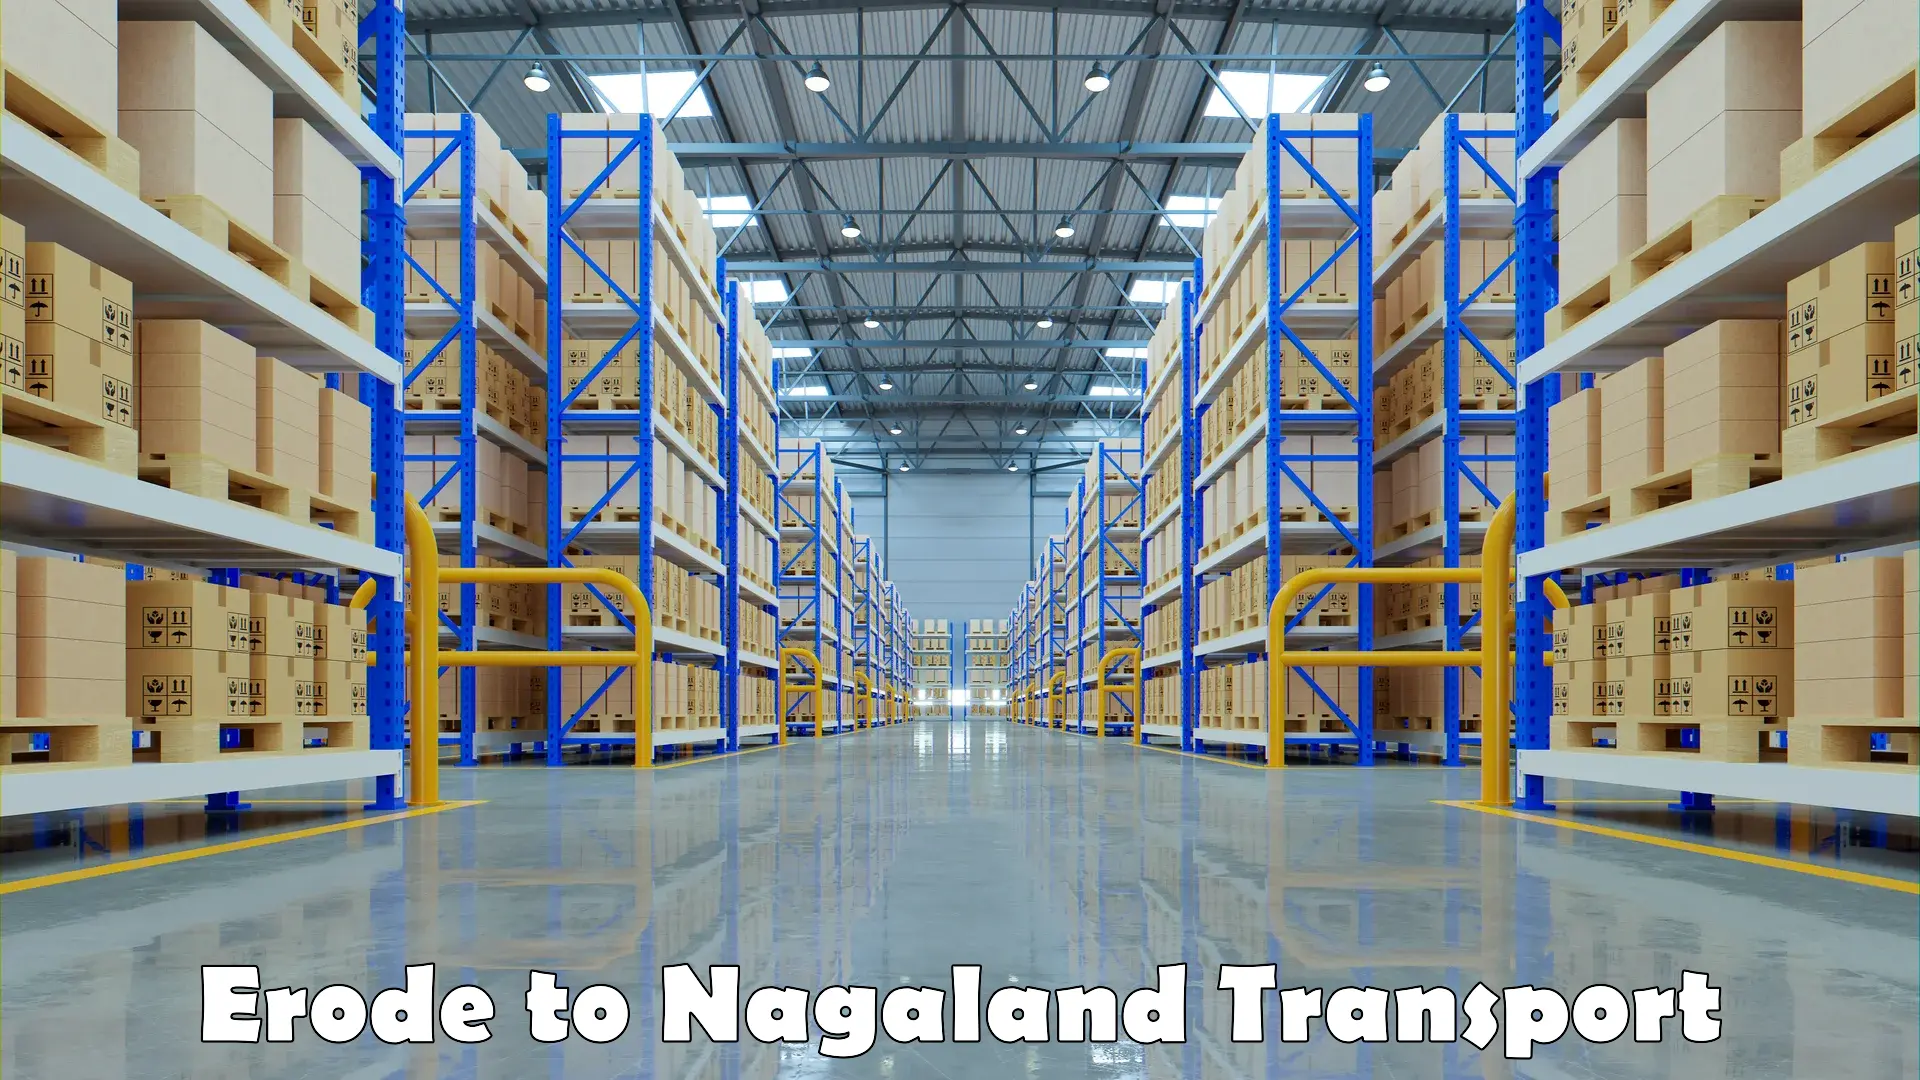 Container transport service Erode to Nagaland